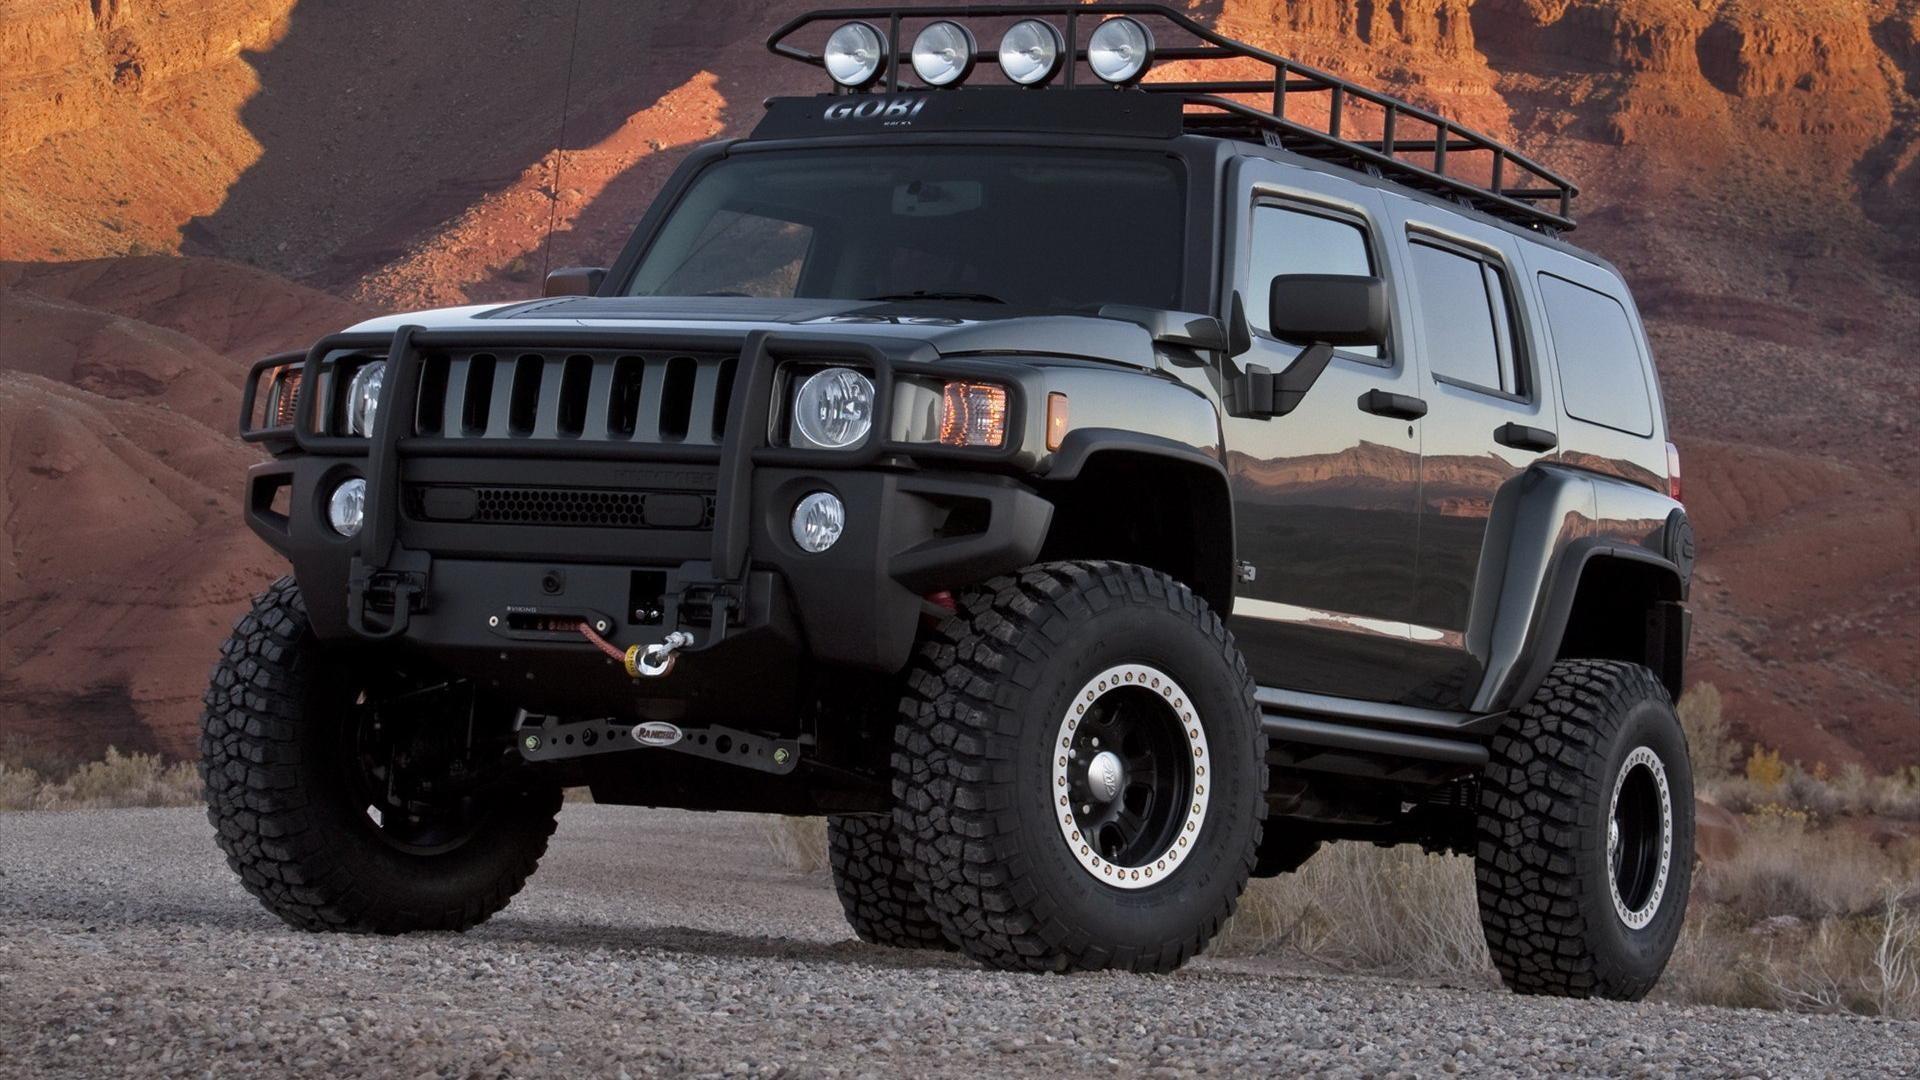 Hummer Car Wallpaper 2018 background picture